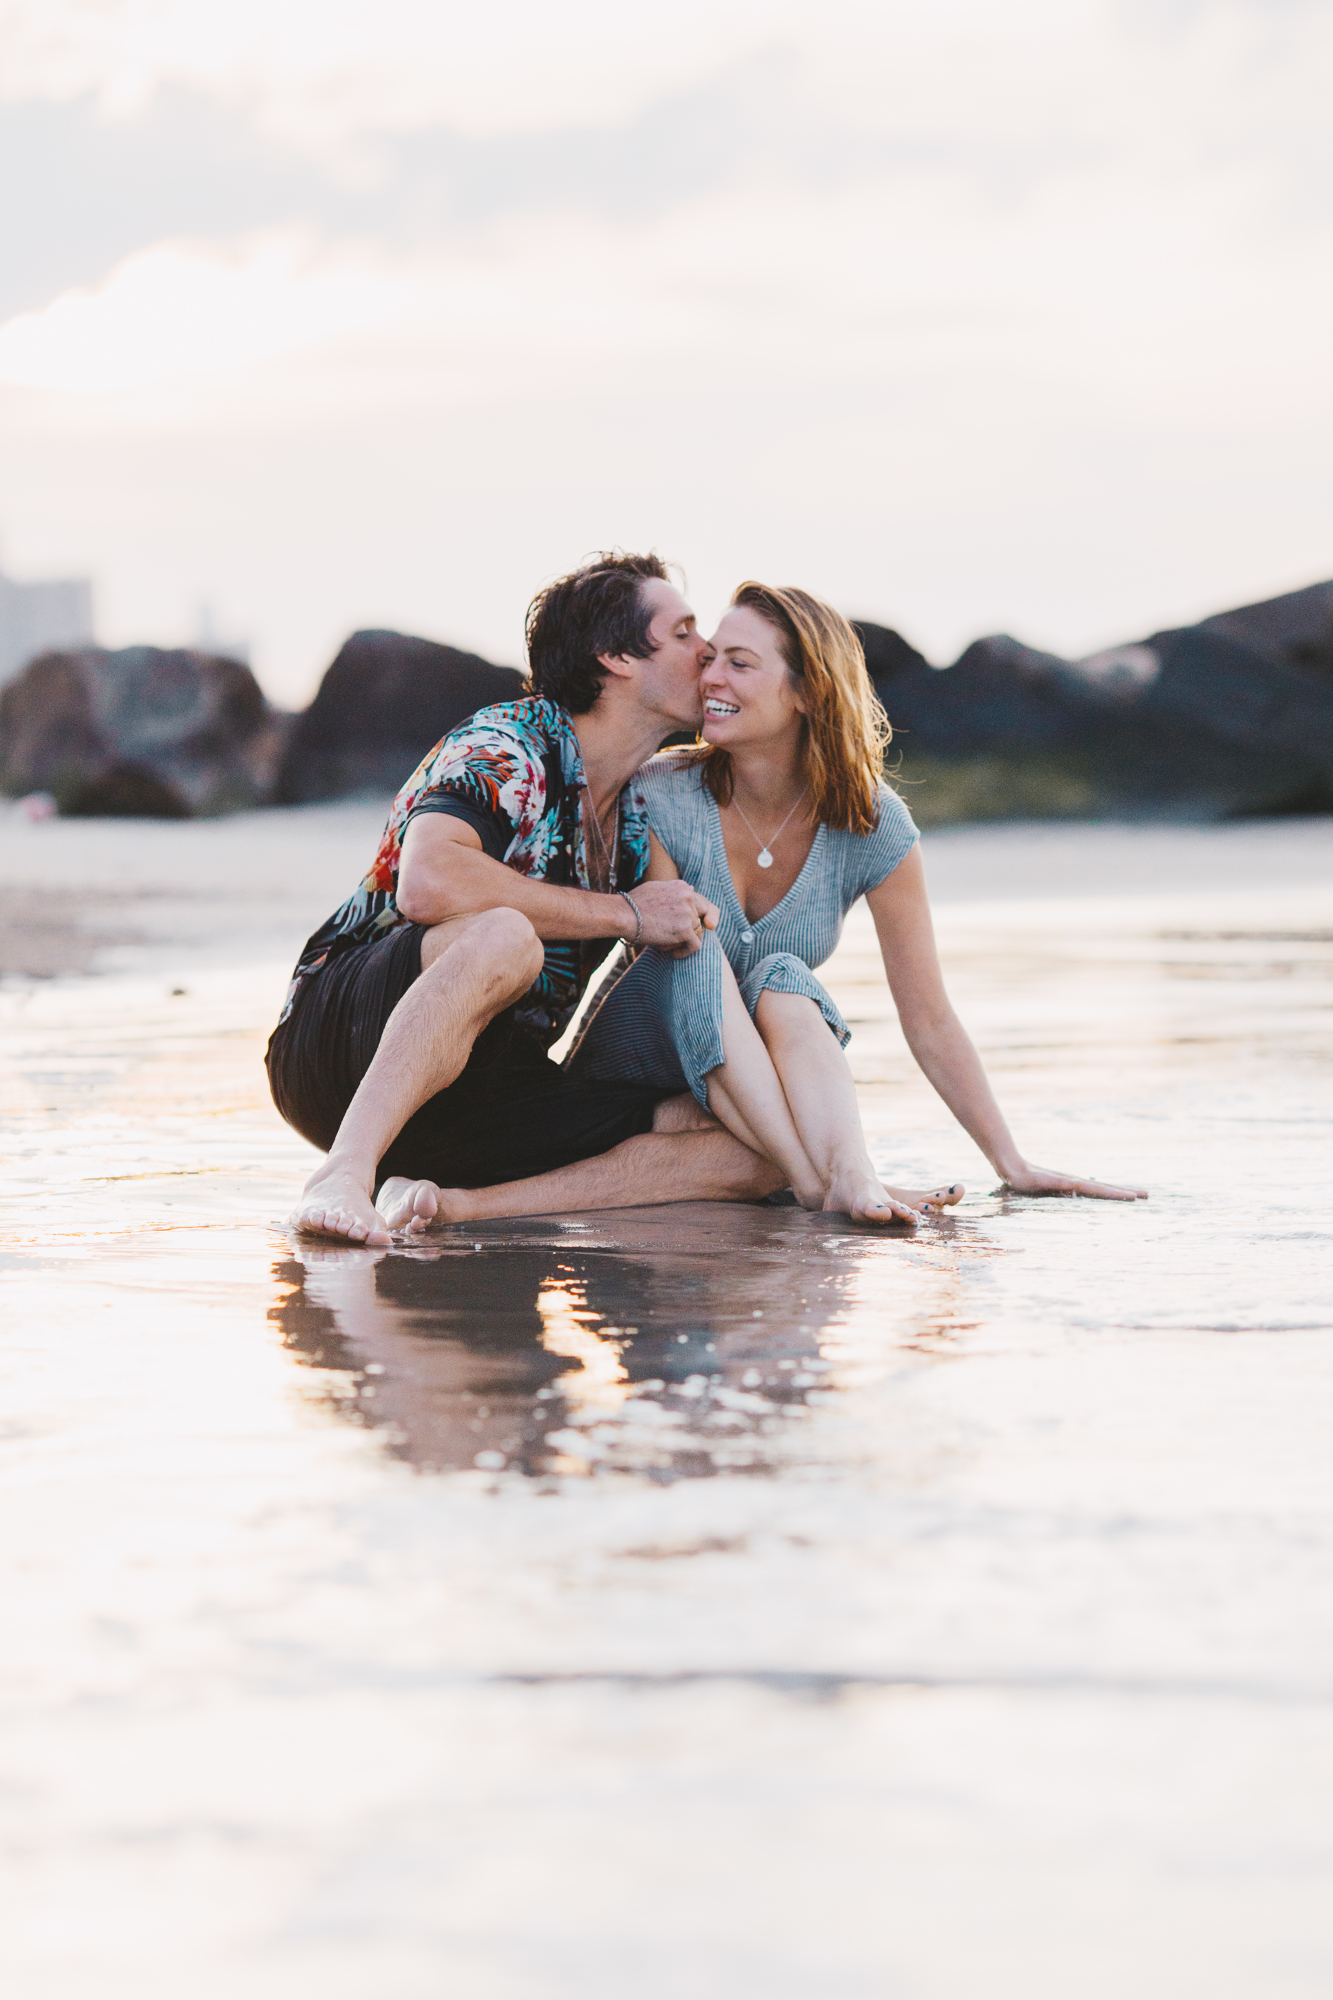 Candid Sunrise Engagement Photos on the Beach at Coney Island